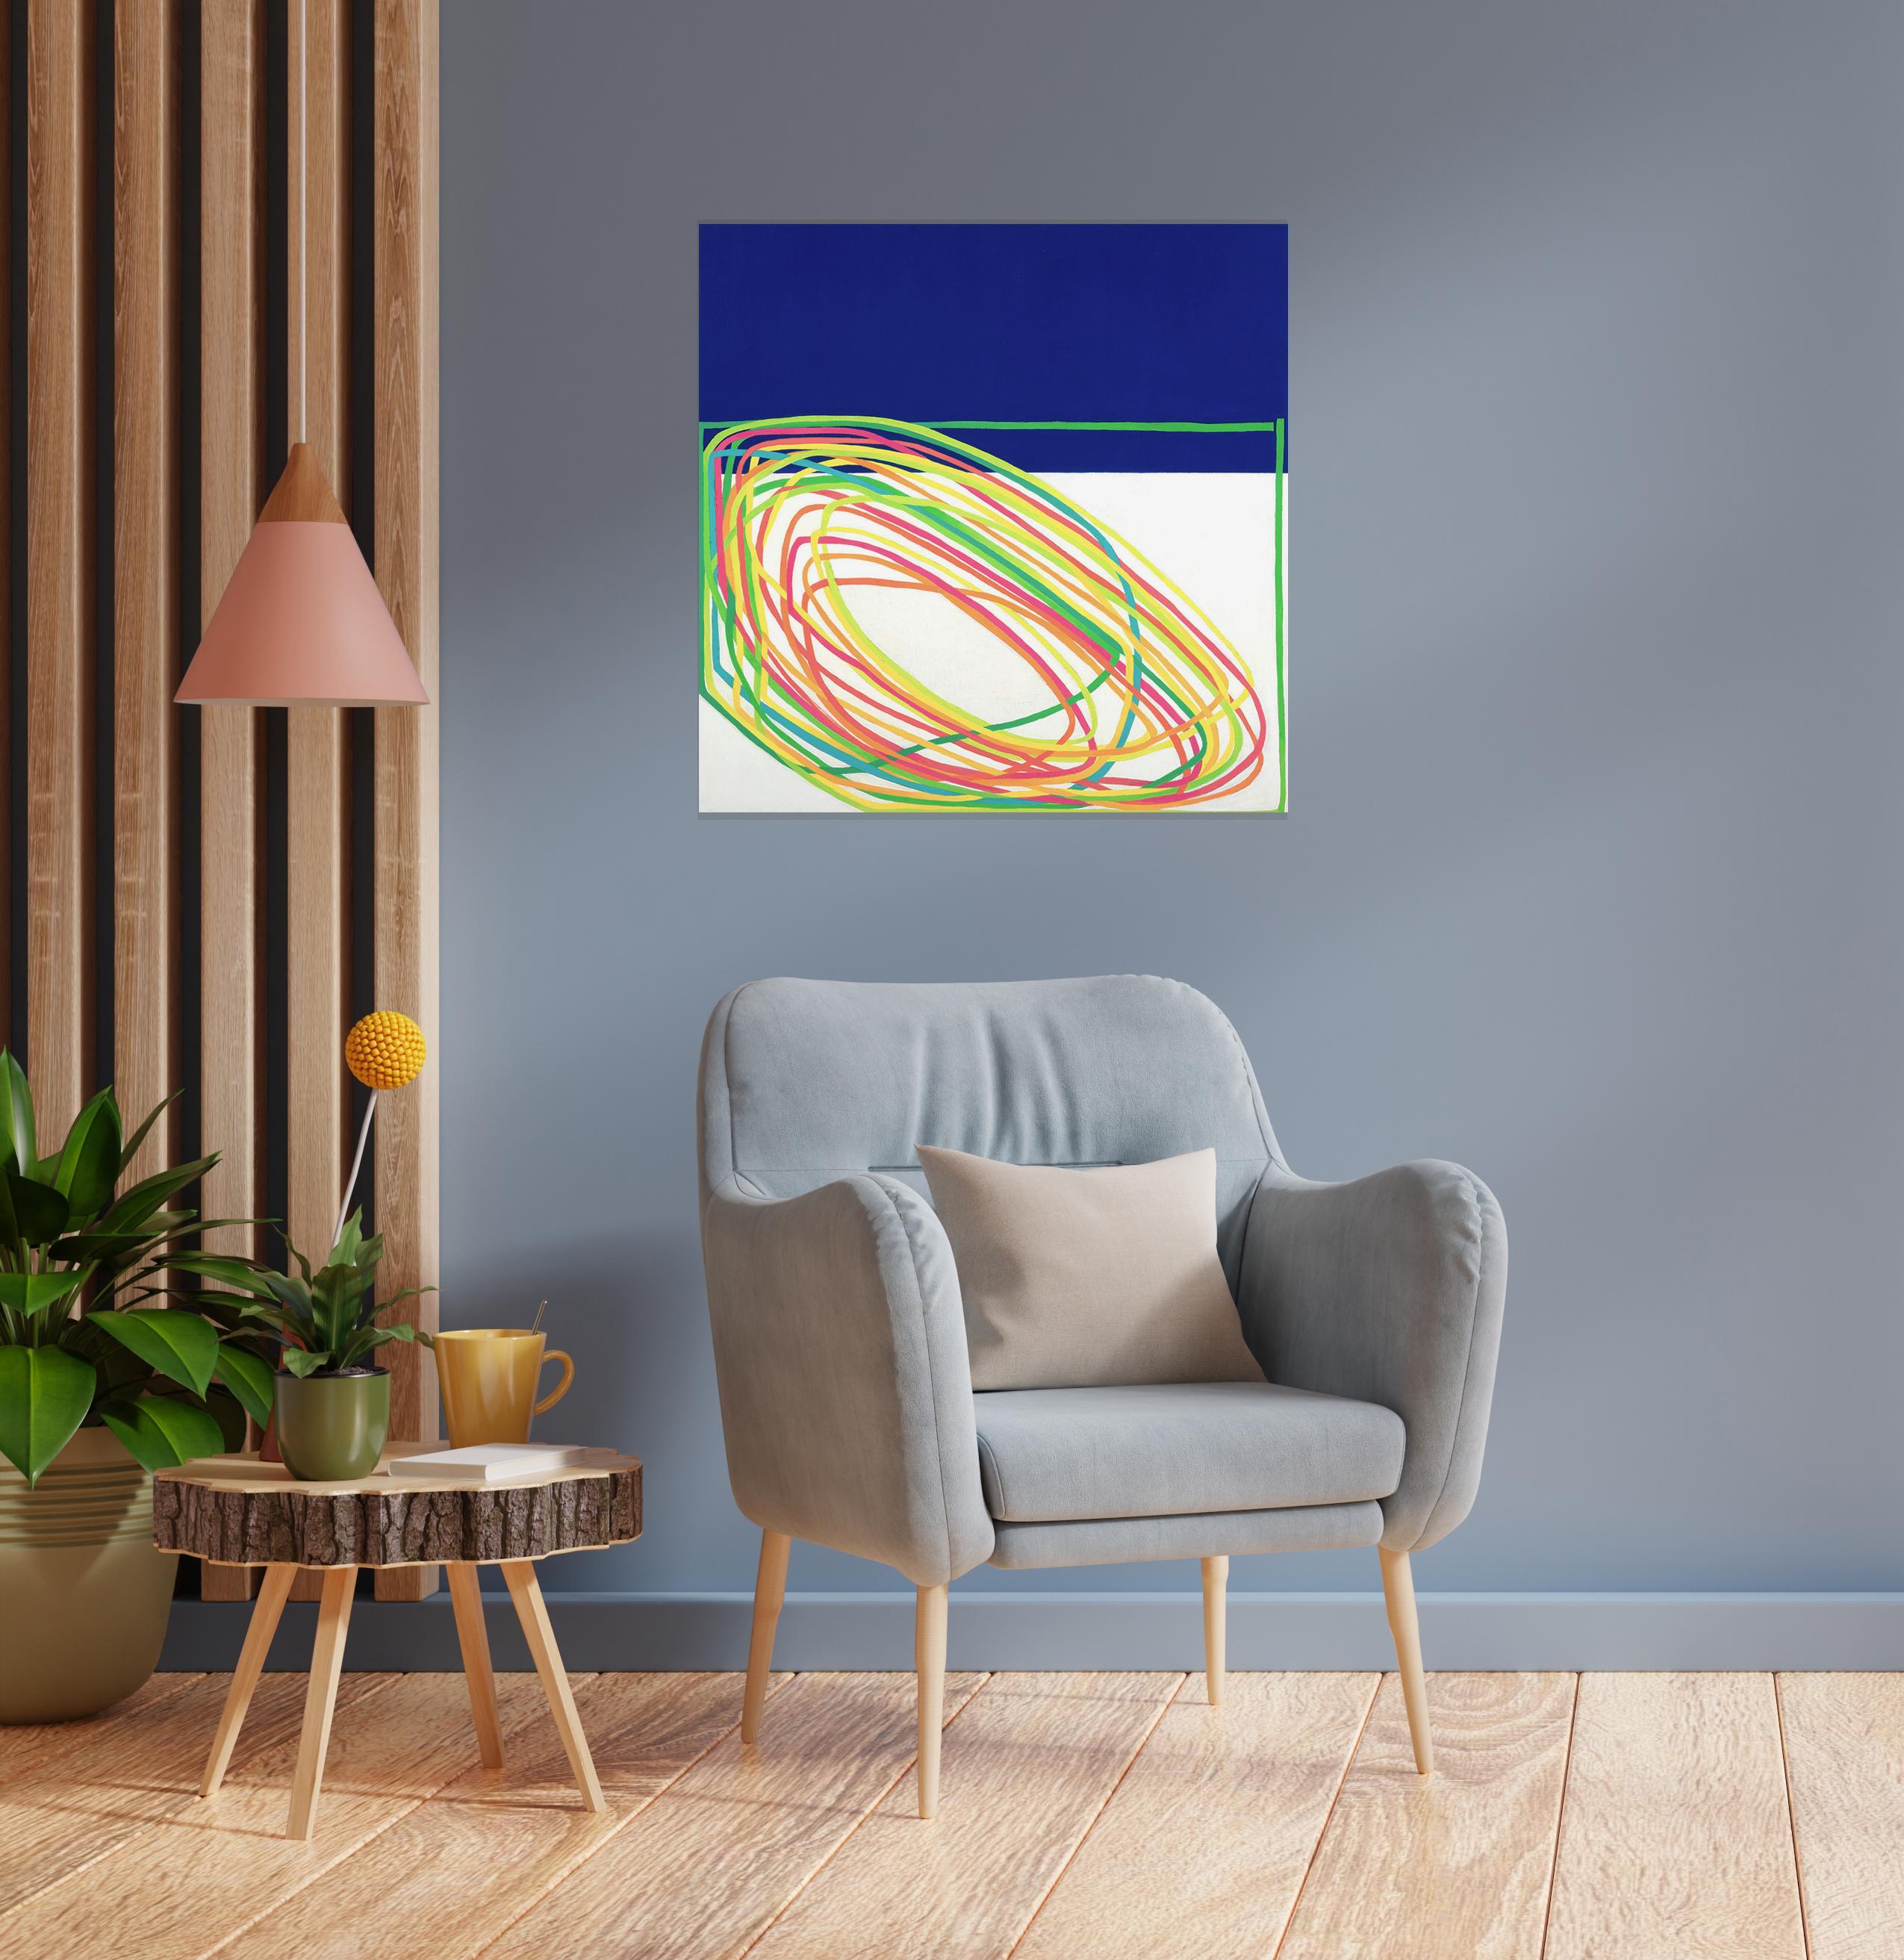 Awry II: oil painting w/ green, yellow, orange & pink line on ocean-blue & white - Abstract Painting by Paula Cahill